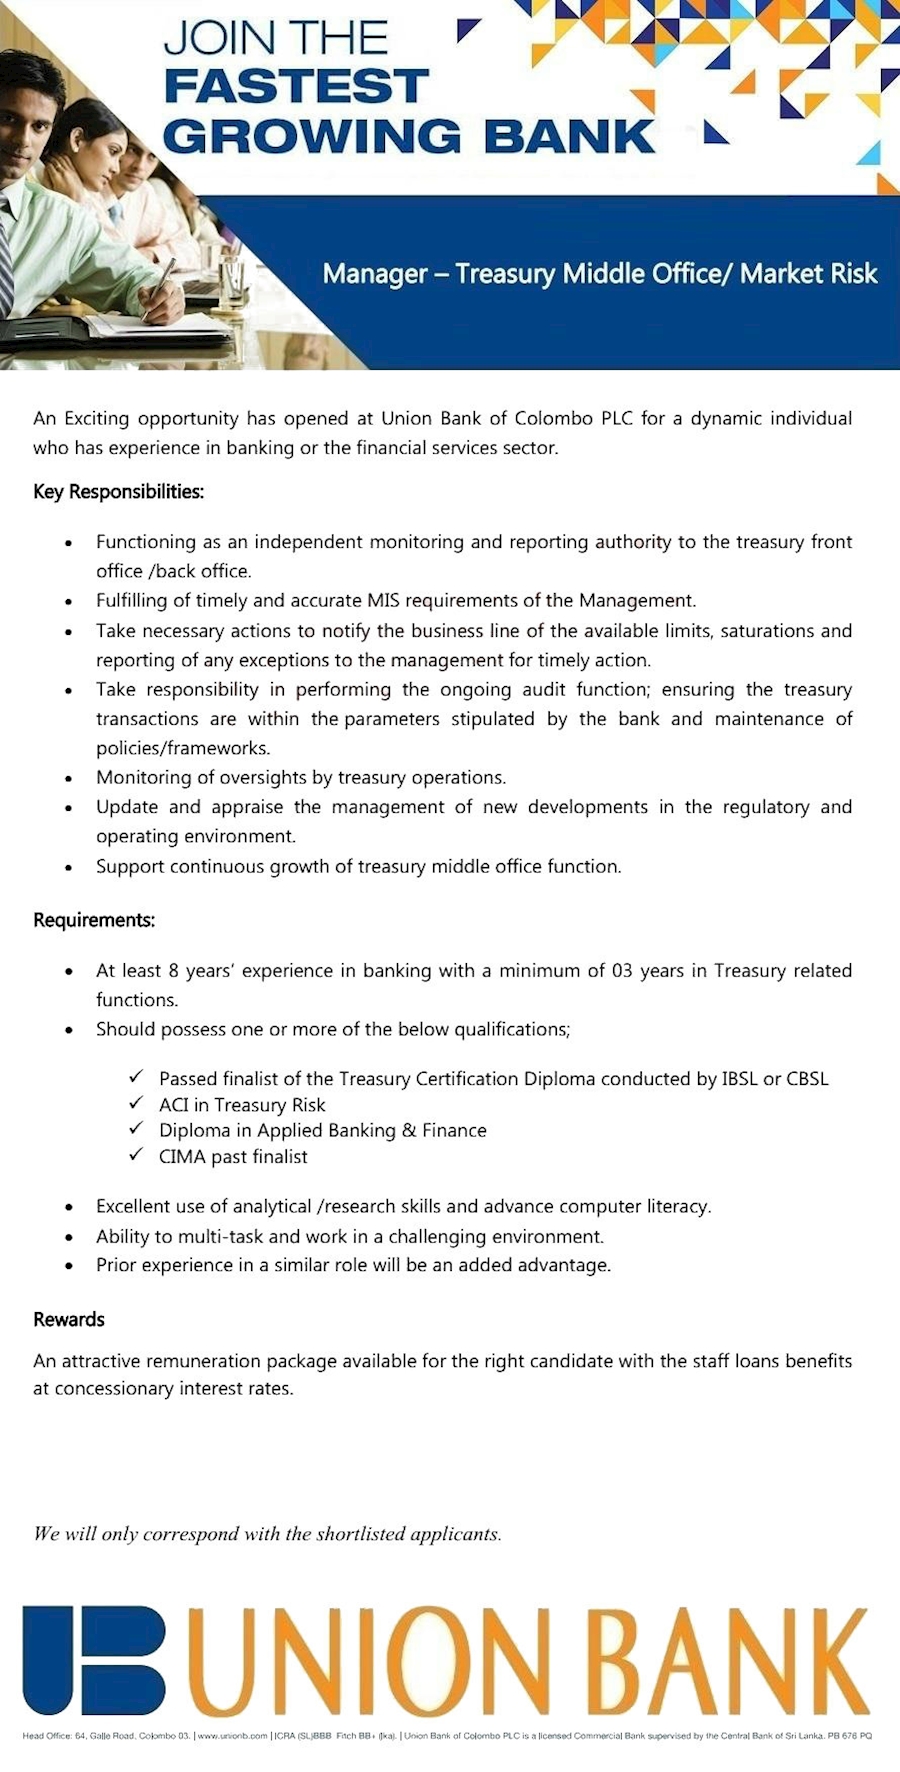 Manager - Treasury Middle Office/Market Risk at Union Bank